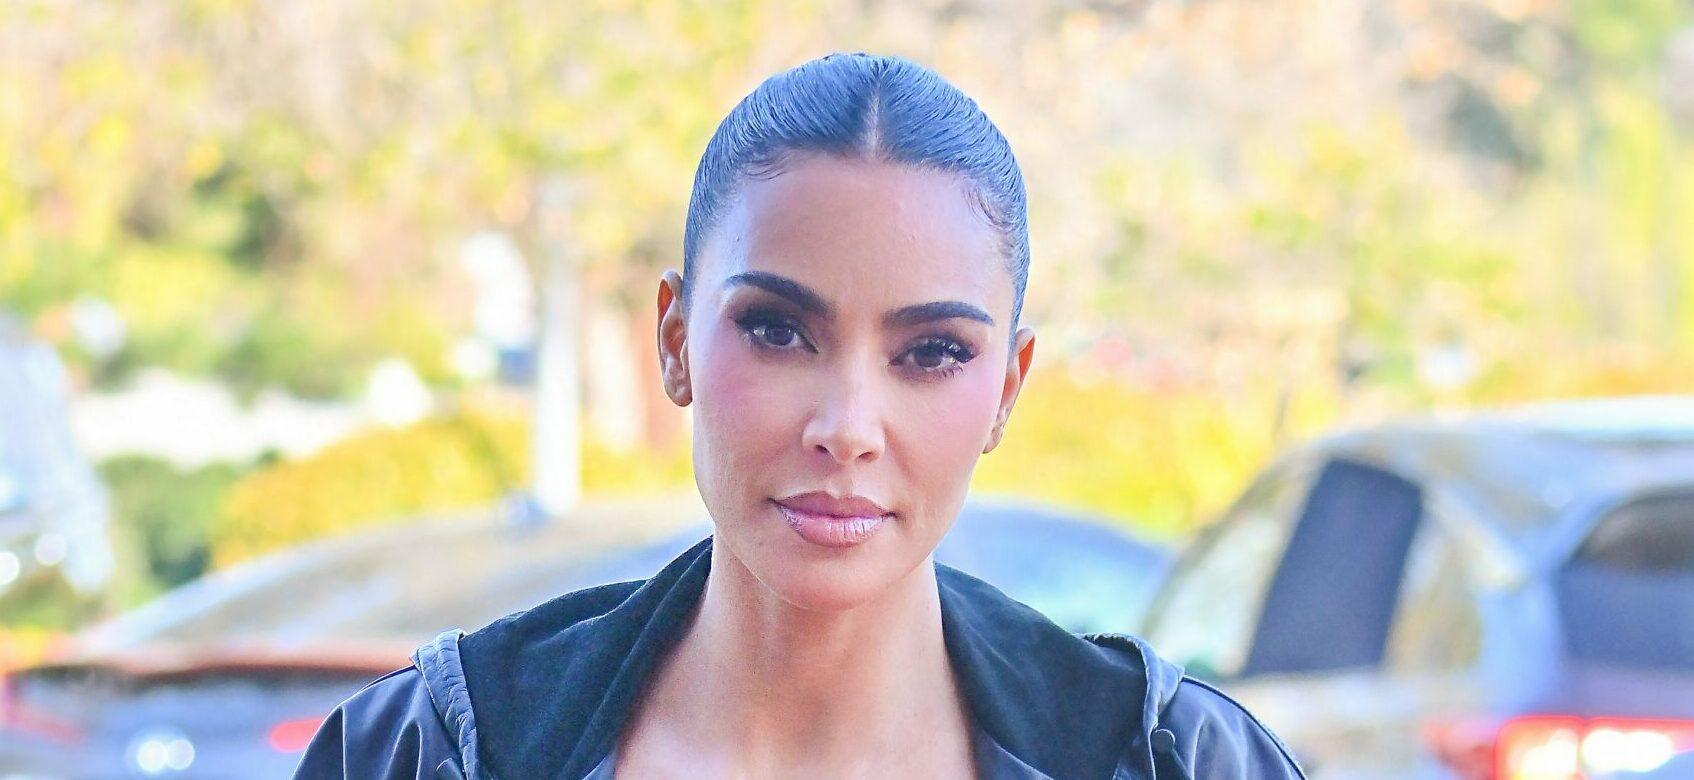 Kim Kardashian Shows Fans Her ‘Racy’ Side Proving She’s Always Been ‘Cool’